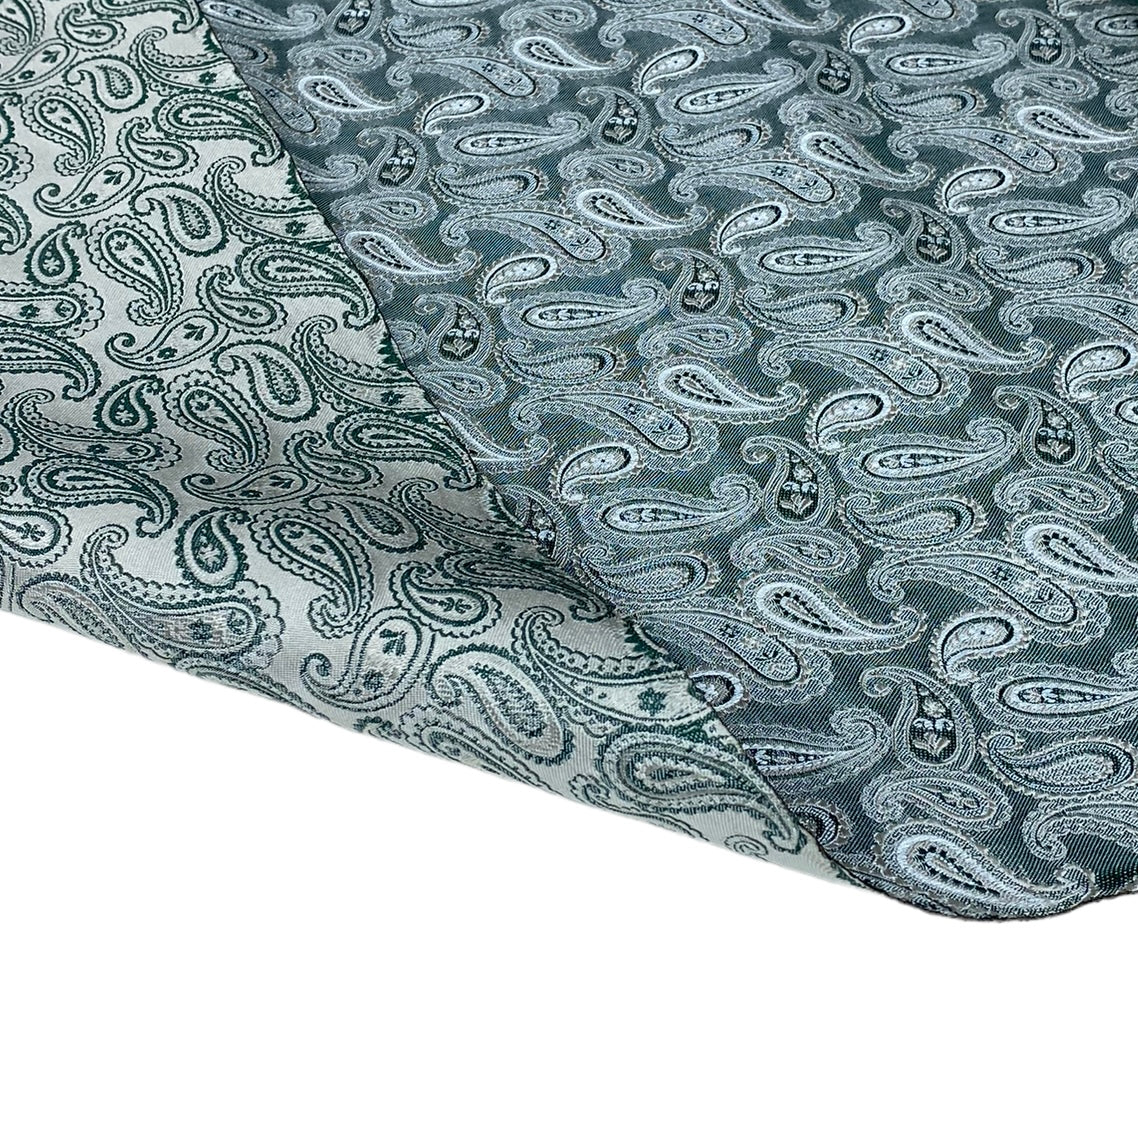 Paisley Silk/Polyester Jacquard - Green / Beige / White  - Remnant